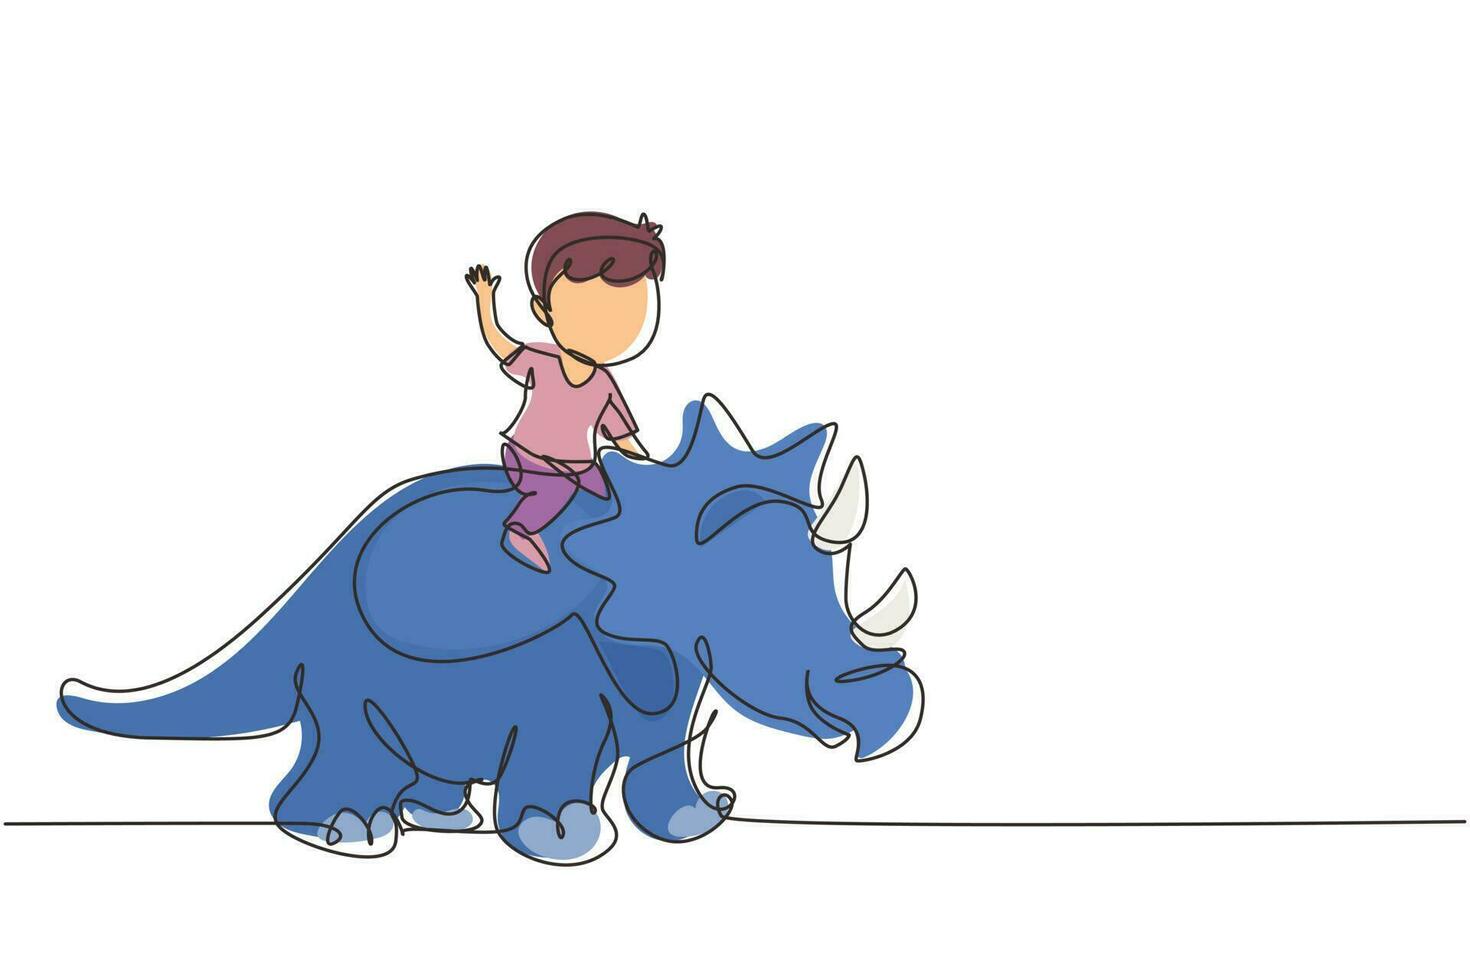 Single one line drawing little boy caveman riding triceratops. Young kid sitting on back of dinosaur. Stone age children. Ancient human life. Continuous line draw design graphic vector illustration